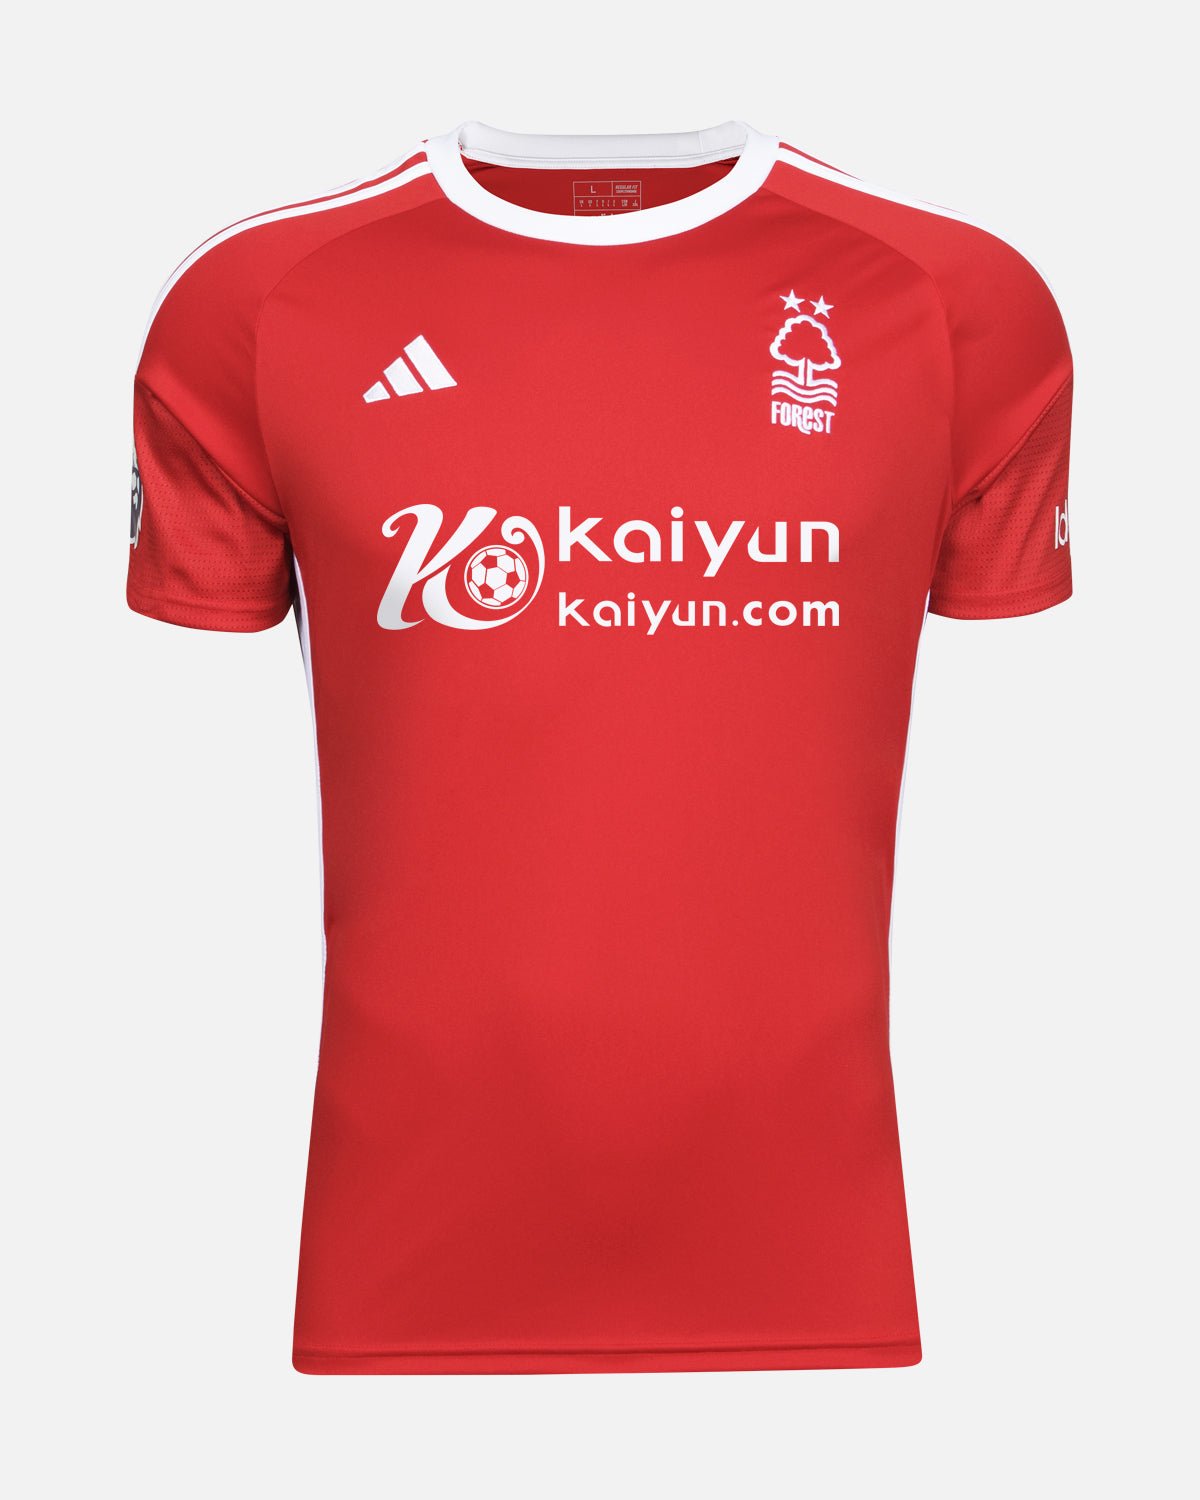 NFFC Home Shirt 23-24 - Murillo 40 - Nottingham Forest FC